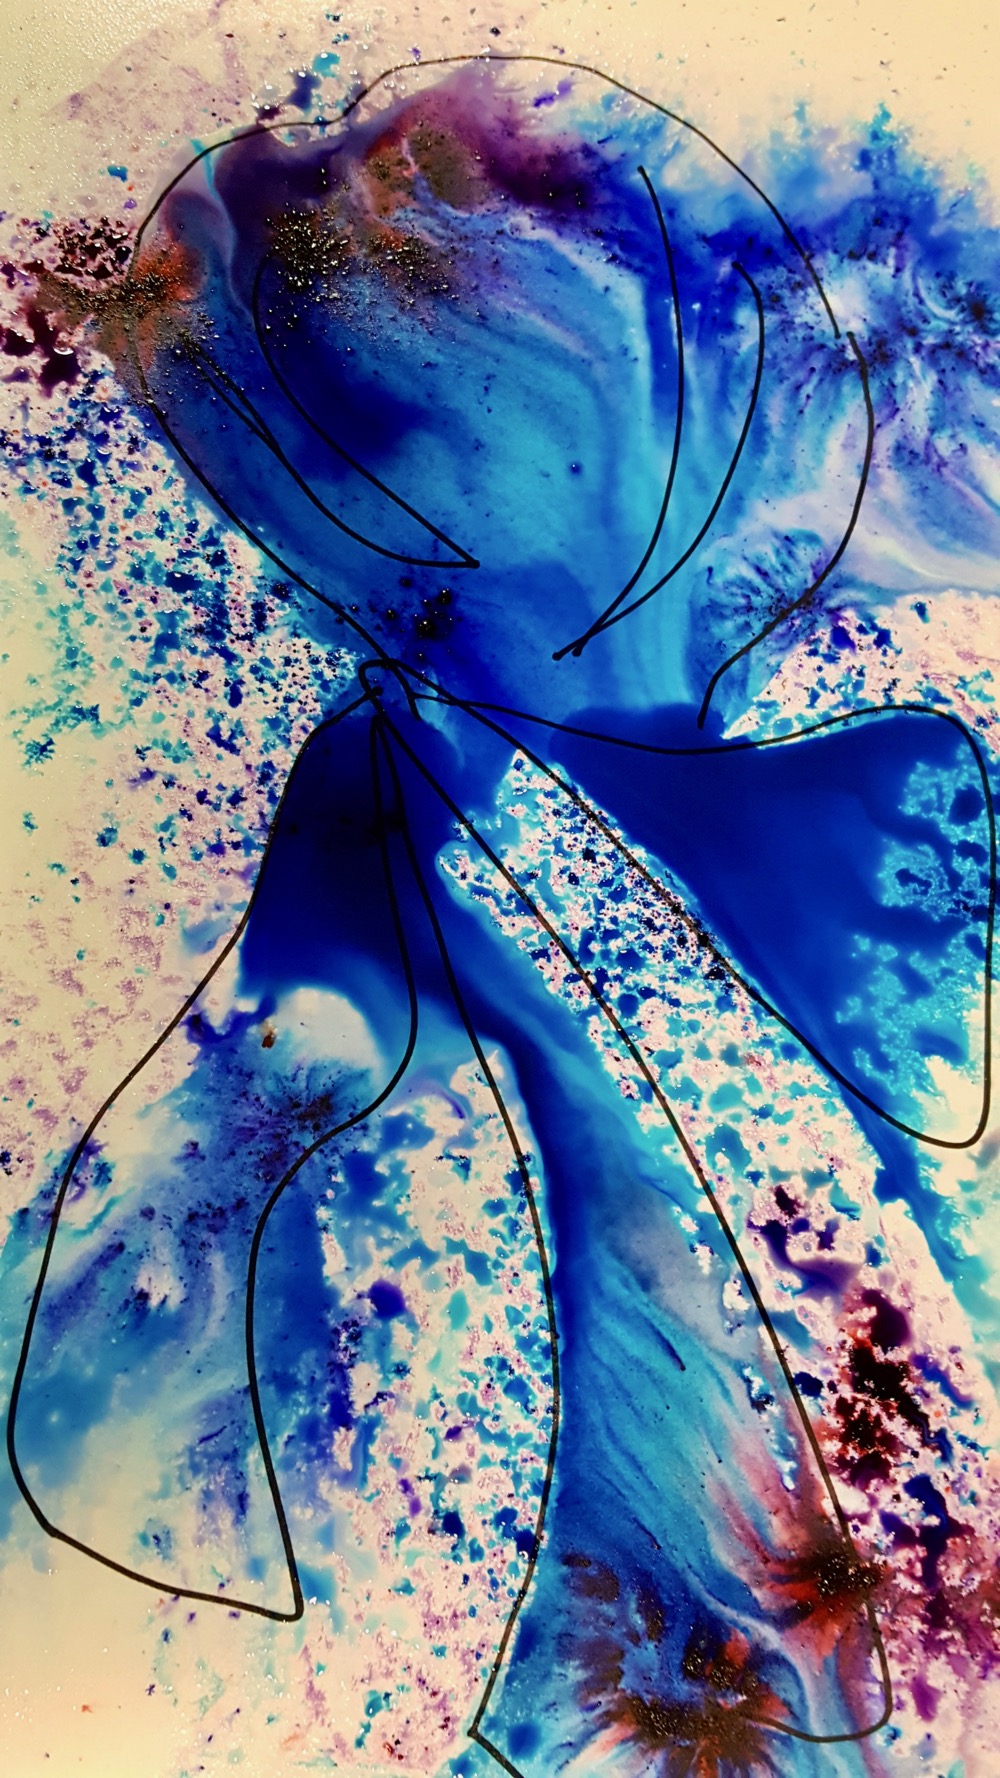 How to Make Beautiful, Liquid Drawings Inspired by Degas